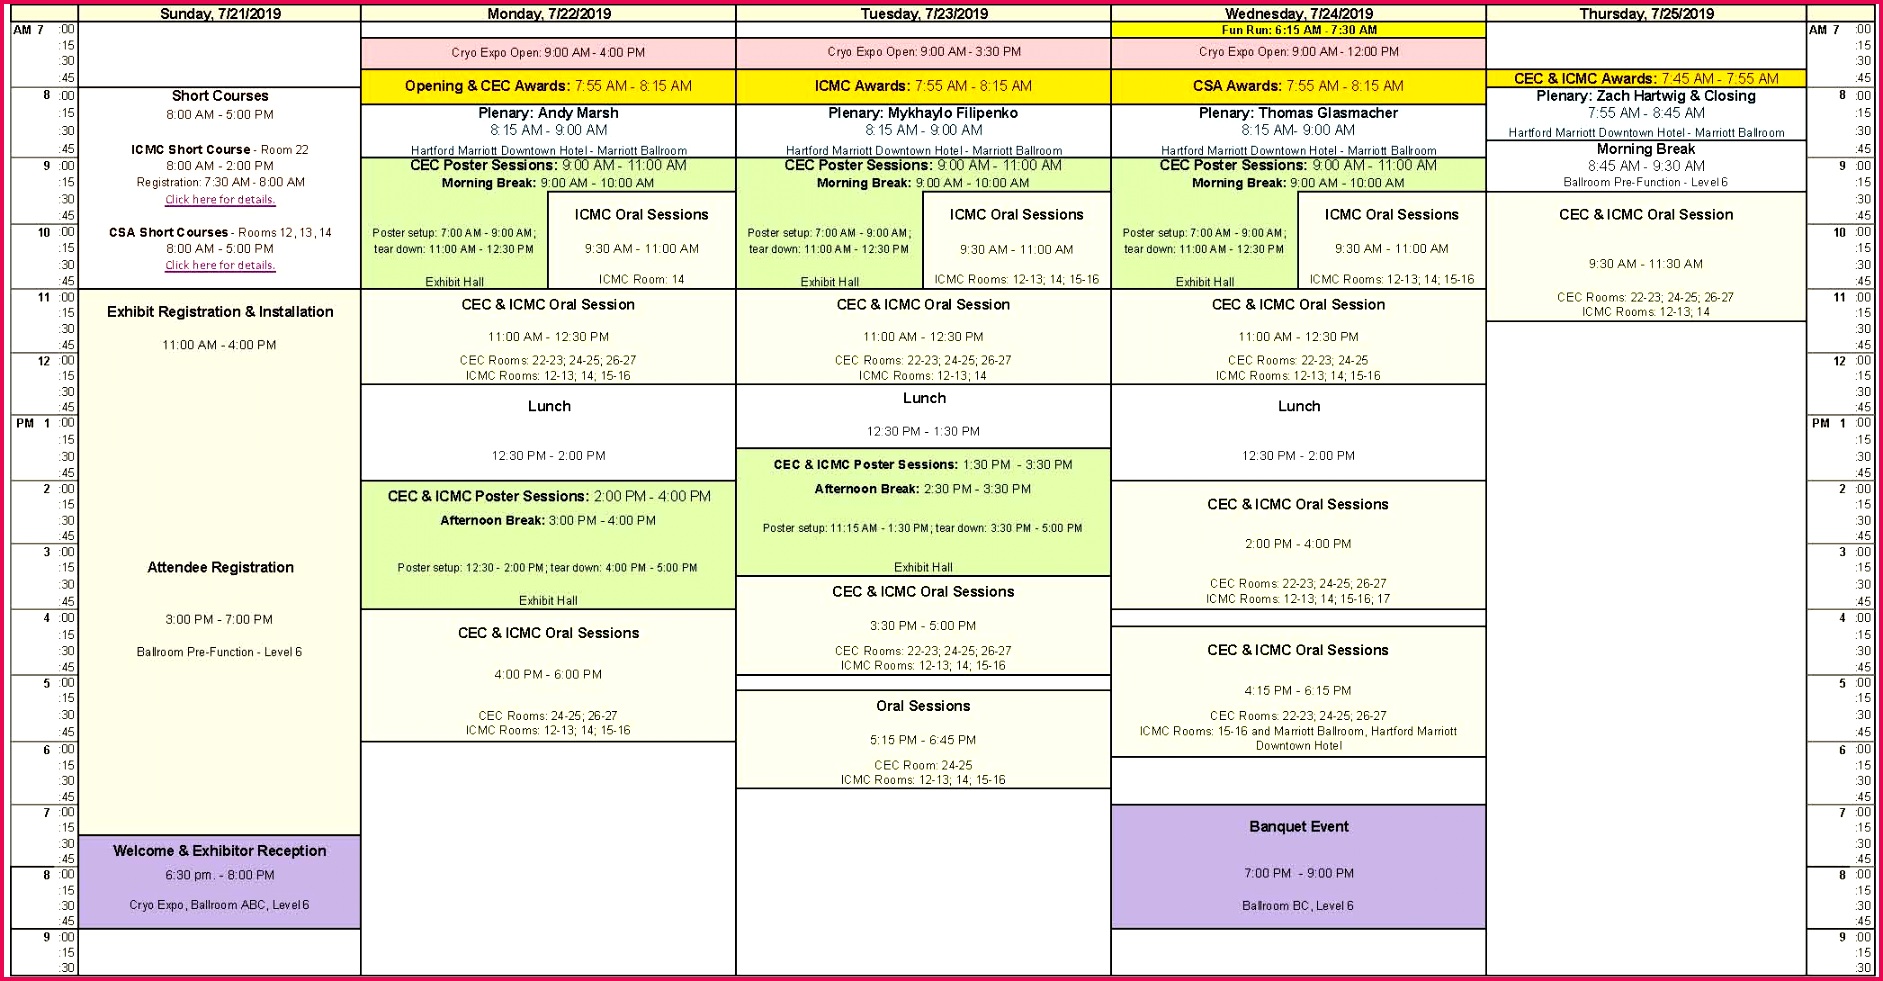 on the image below to the Schedule at a Glance in PDF format